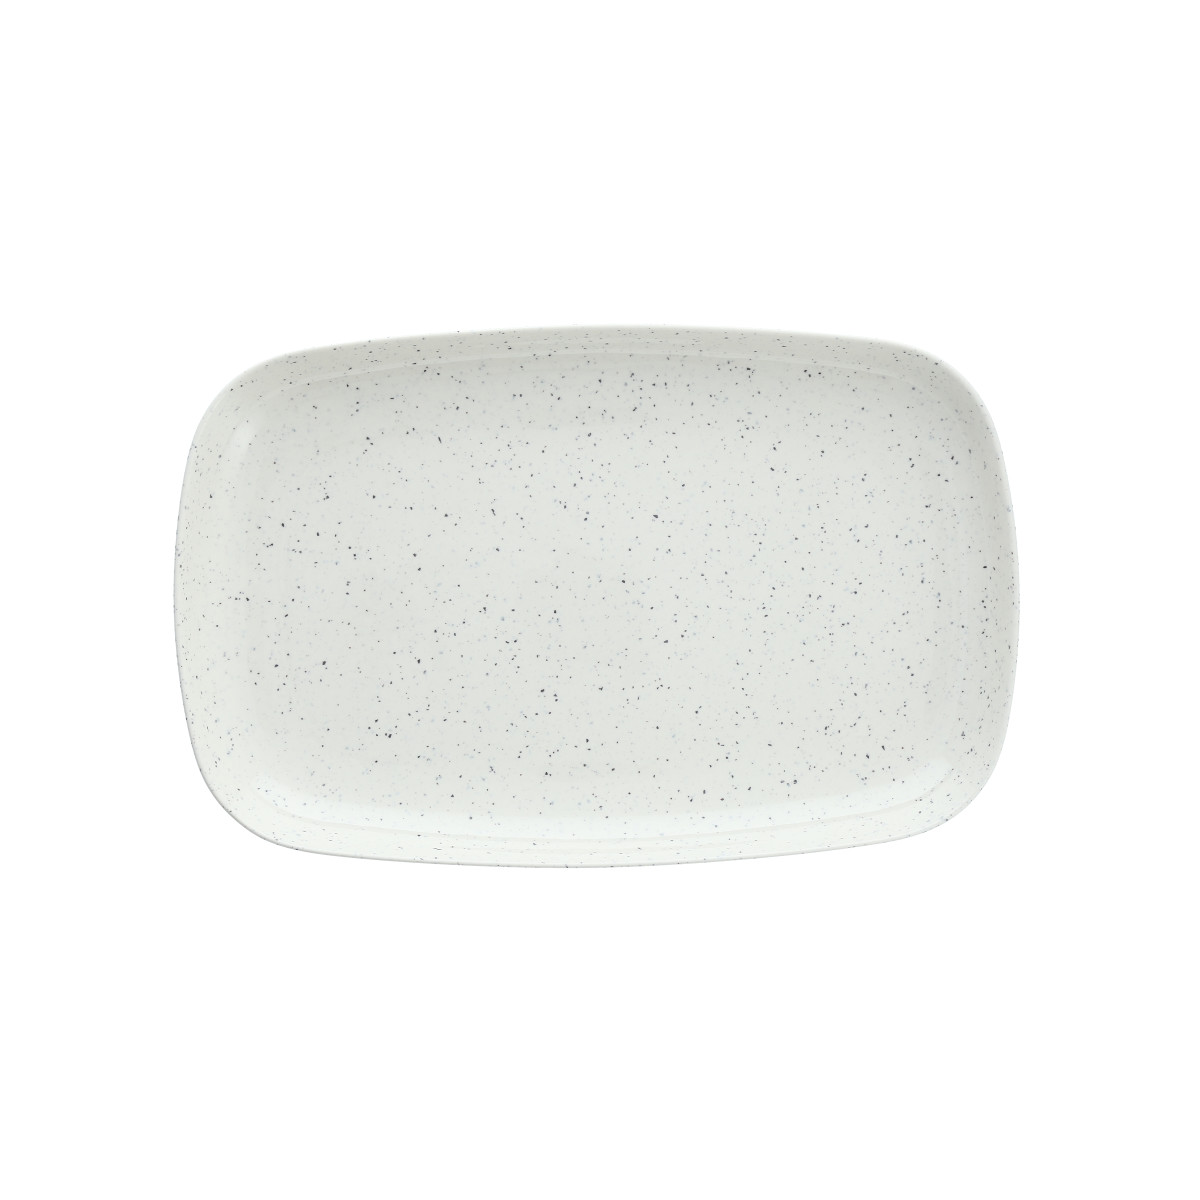 Camp White Coupe Platter 14x9"